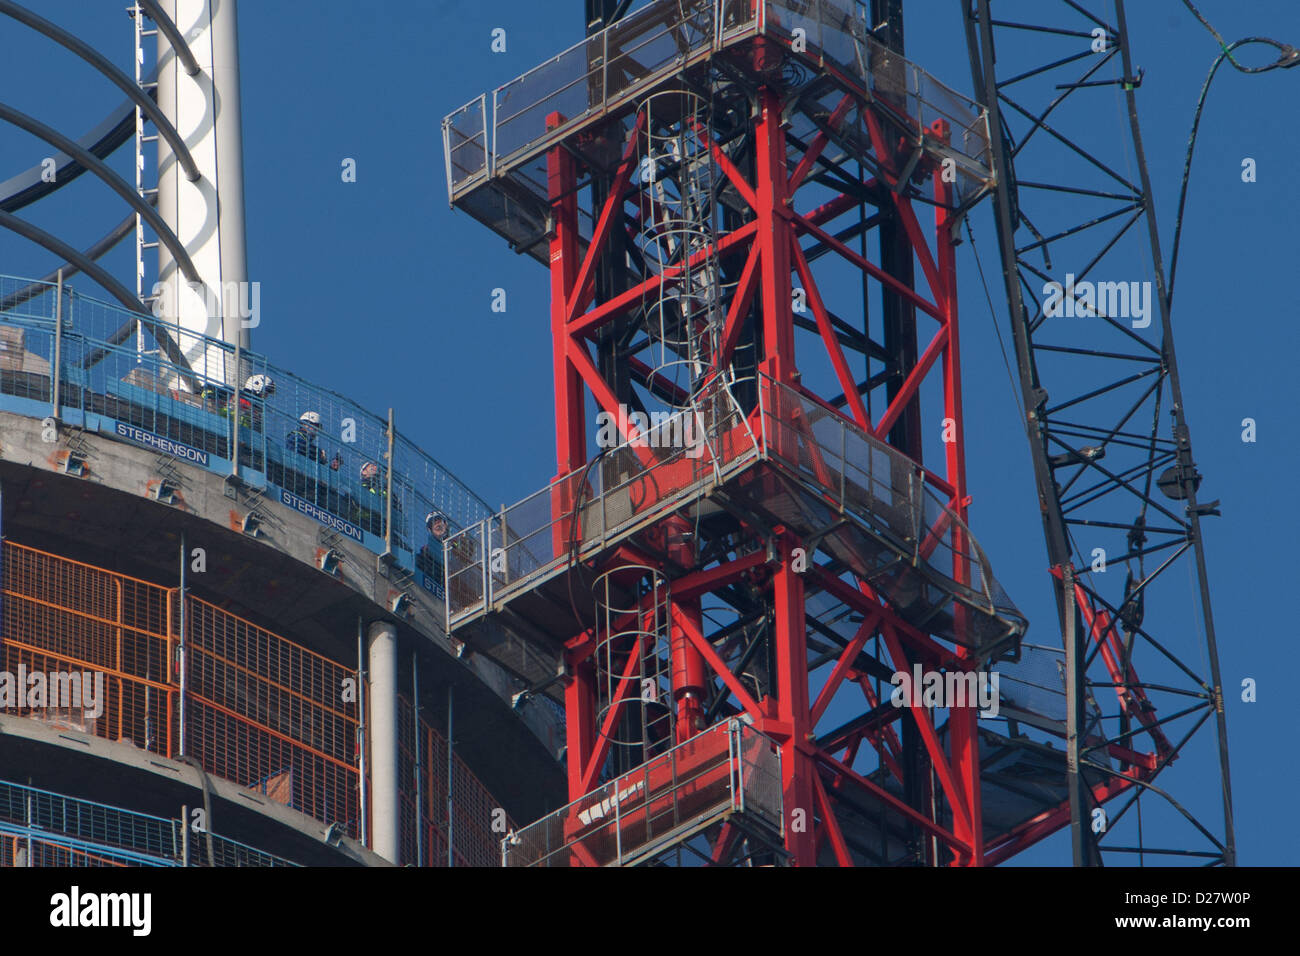 London, UK. 16th January 2013. Firefighters inspecting damaged crane on St George's Wharf tower that an Agusta 109 helicopter had collided with in Wandsworth Road in Vauxhall, London, 16th January 2013. Credit:  martyn wheatley / Alamy Live News Stock Photo